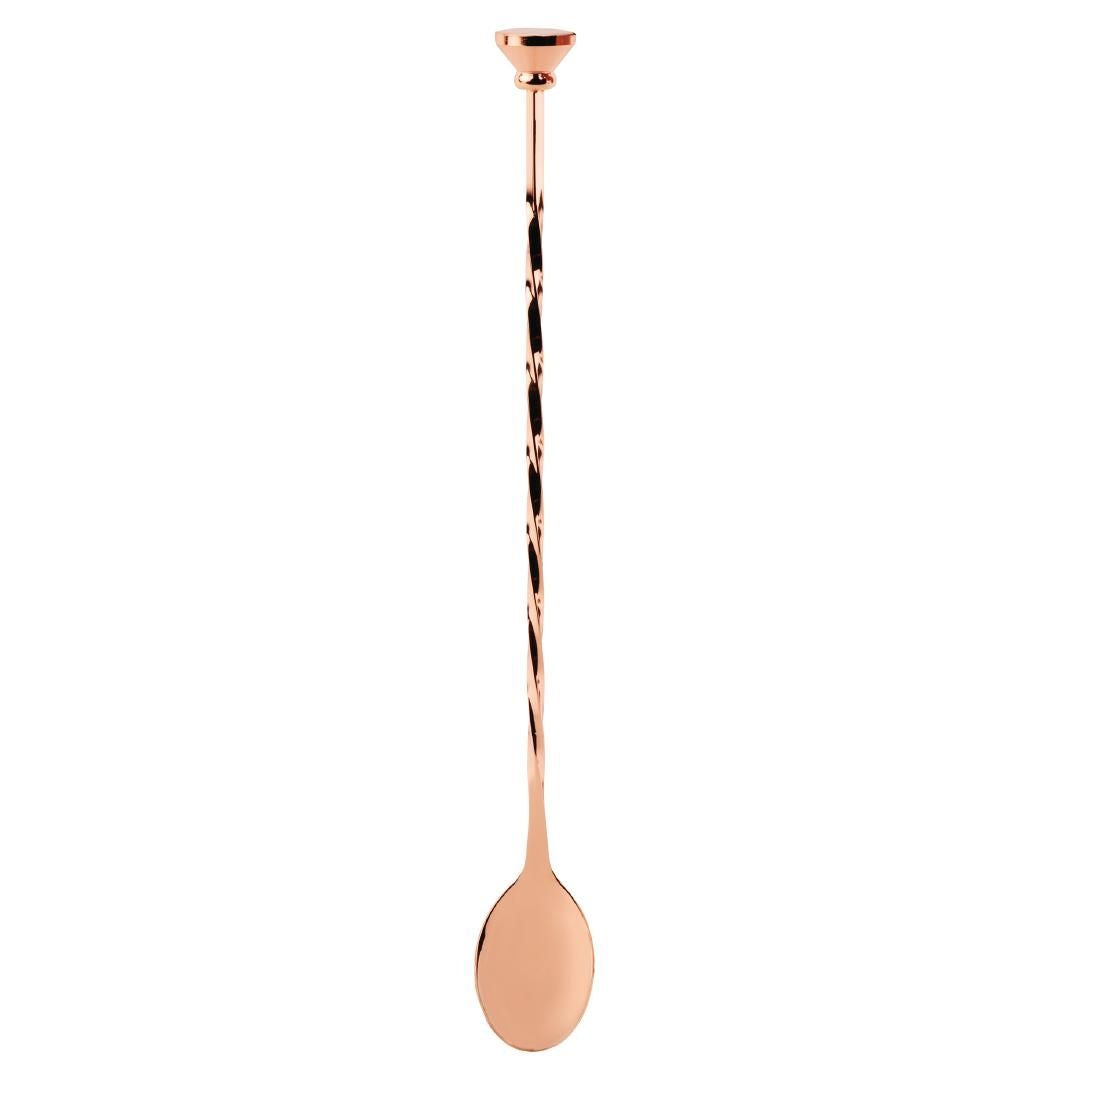 DR615 Olympia Cocktail Mixing Spoon